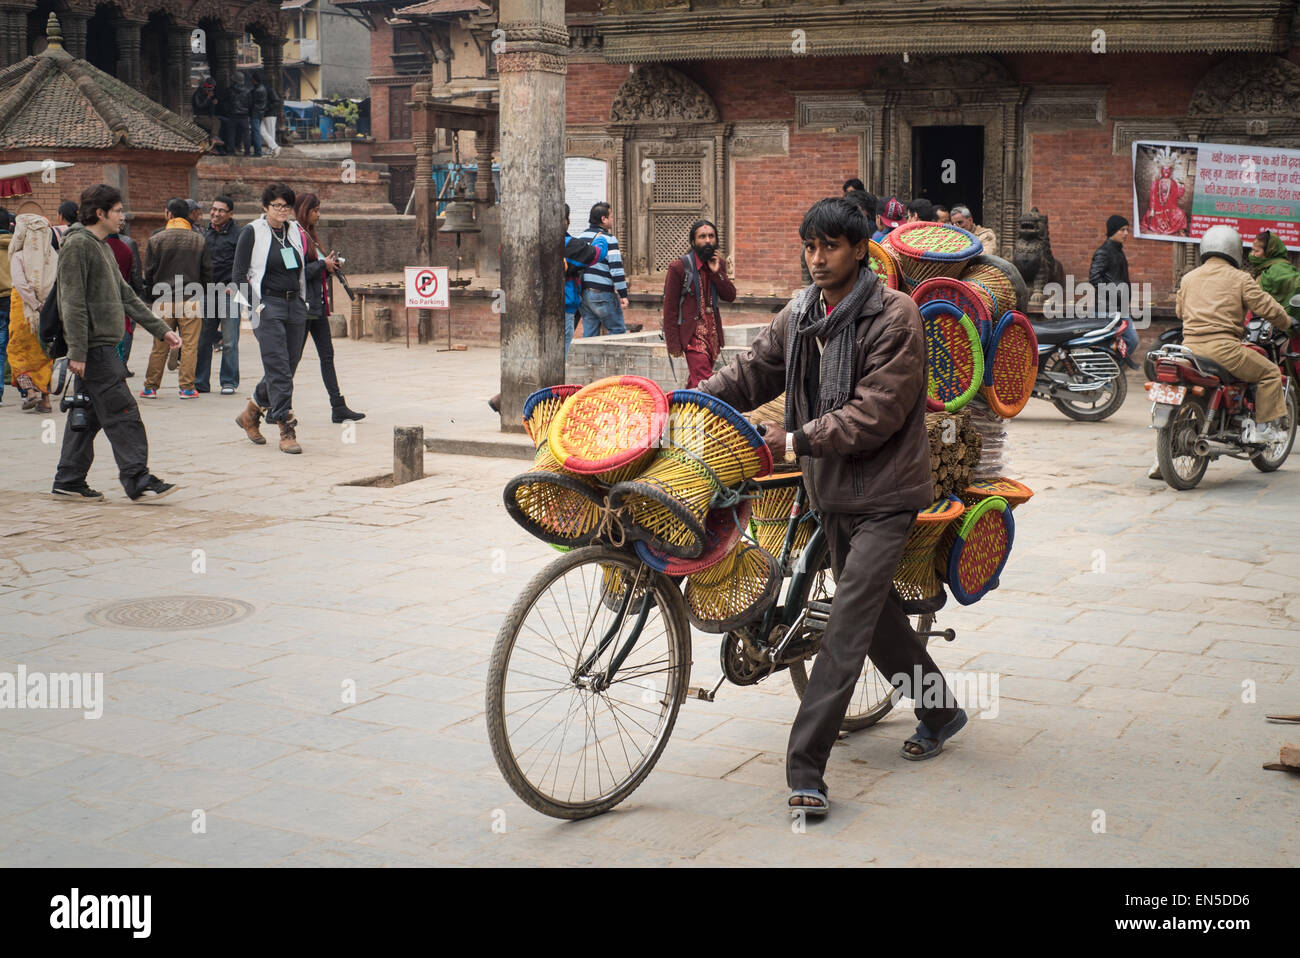 Around Lalitpur and Patan Durbar square in Nepal, few months before the 7.8 magnitude earthquake that killed thousands Stock Photo